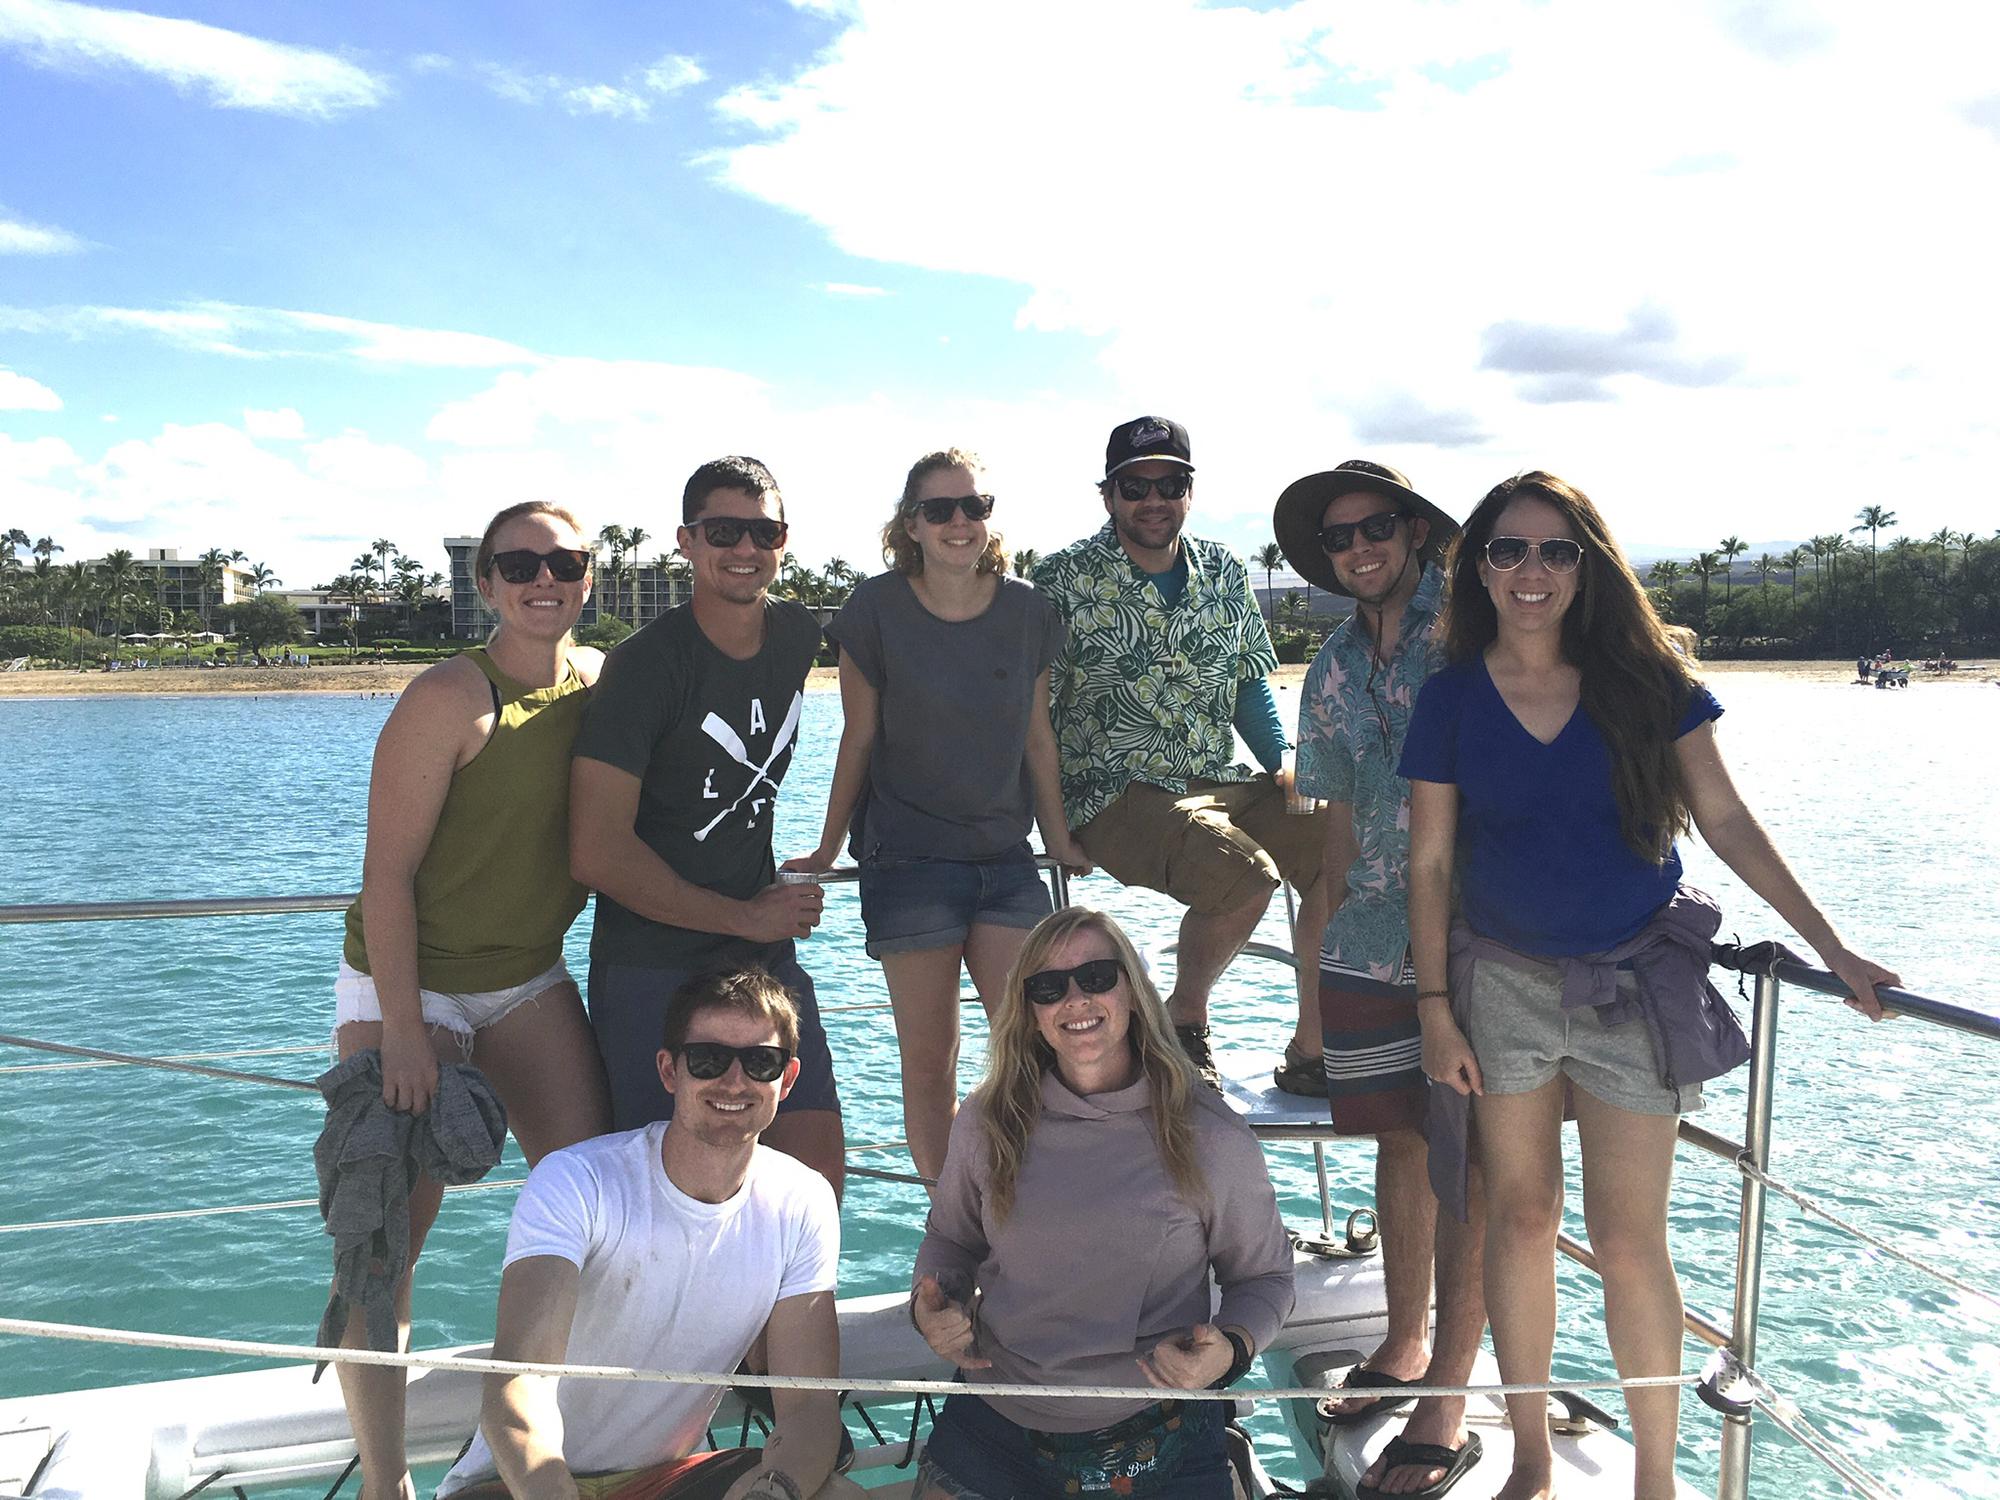 Whale watching with the crew after our half marathon in Waikoloa